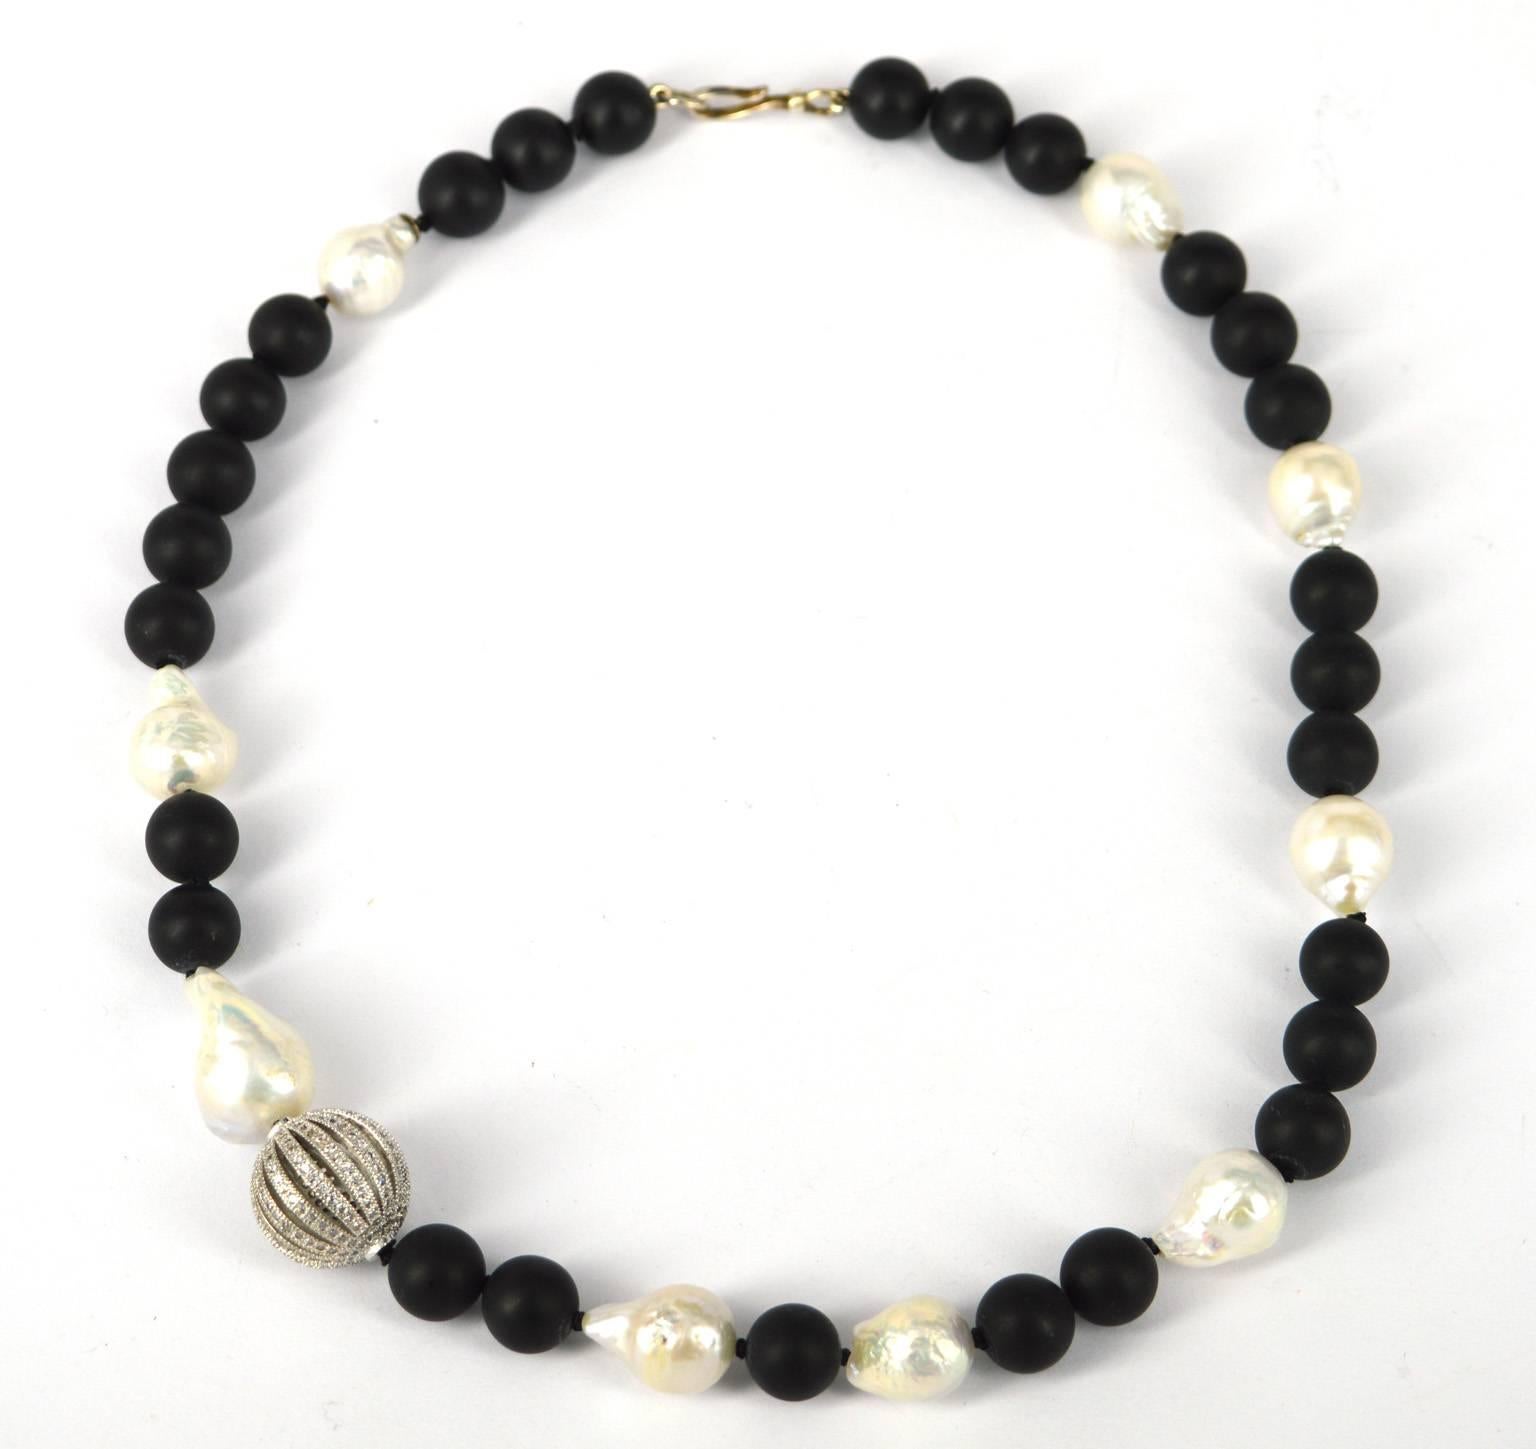 Asymmetrical statement black and white necklace. Matt 10mm black Onyx round and 15mm Fresh water Baroque pearls with a stunning 19cm rhodium plate brass CZ feature bead.

Hand knotted on black thread.
Length of necklace 48cm with Sterling Silver